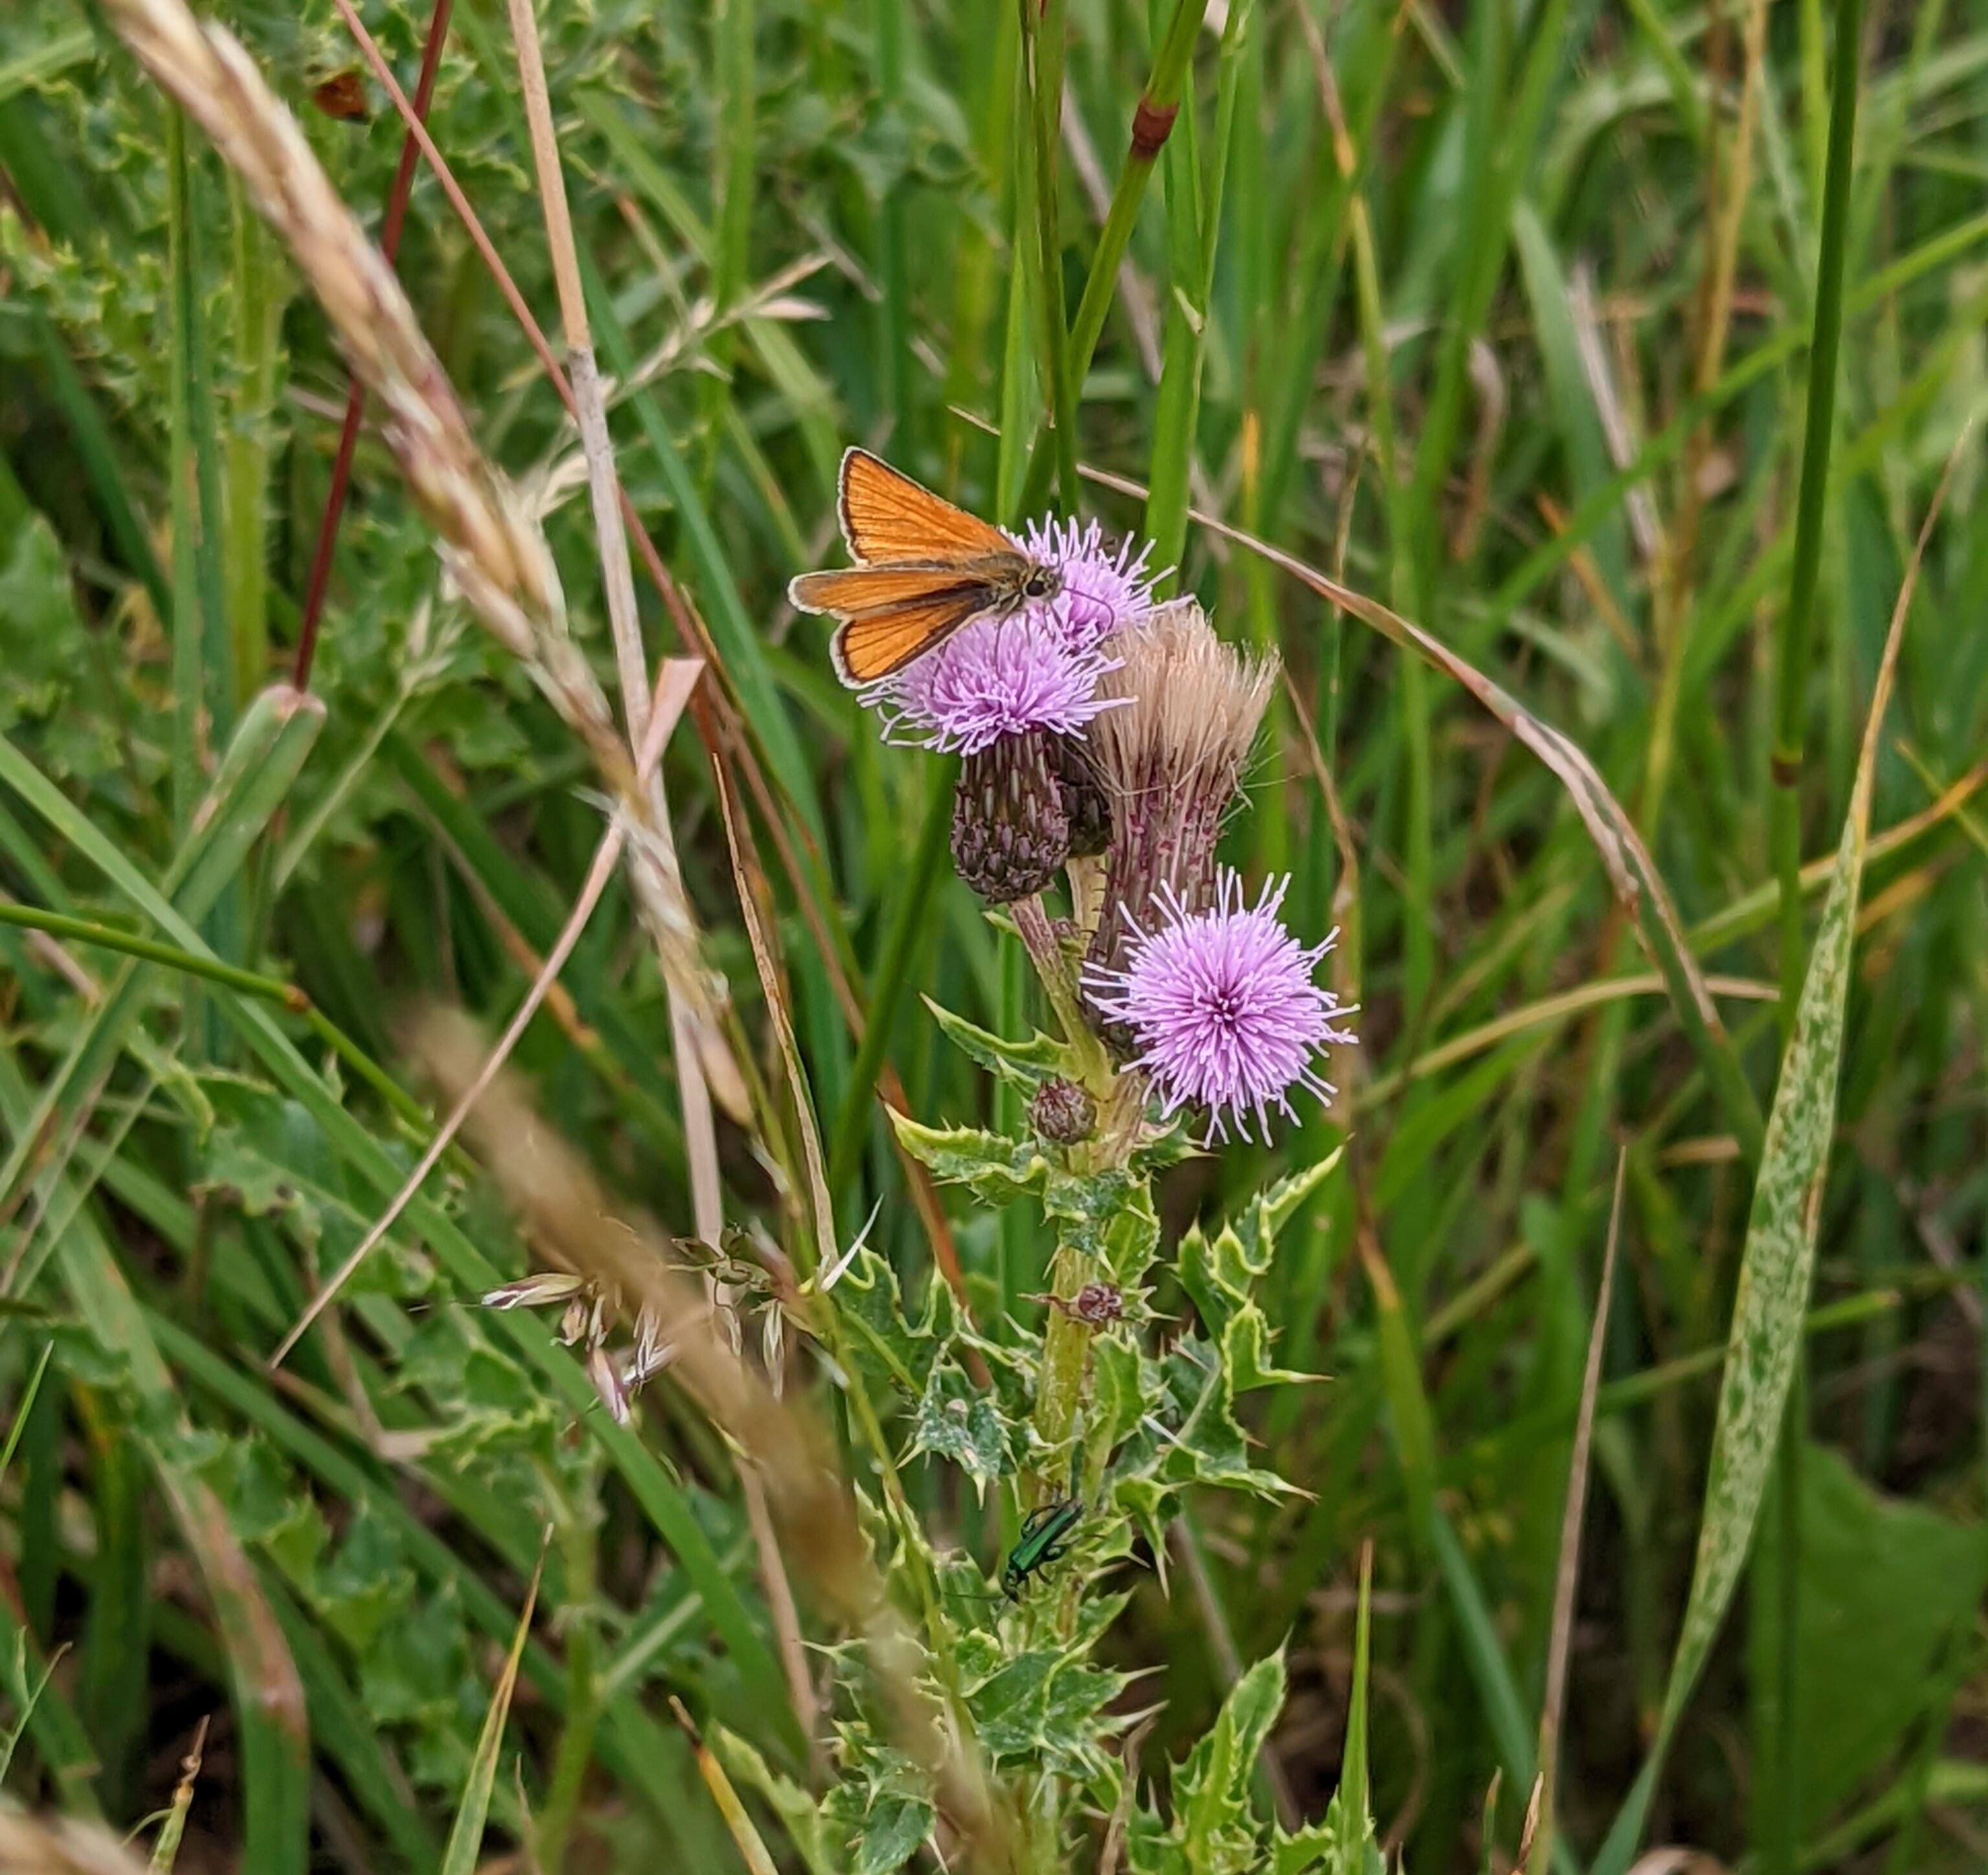 A photograph of am orange butterfly on a purple thistle